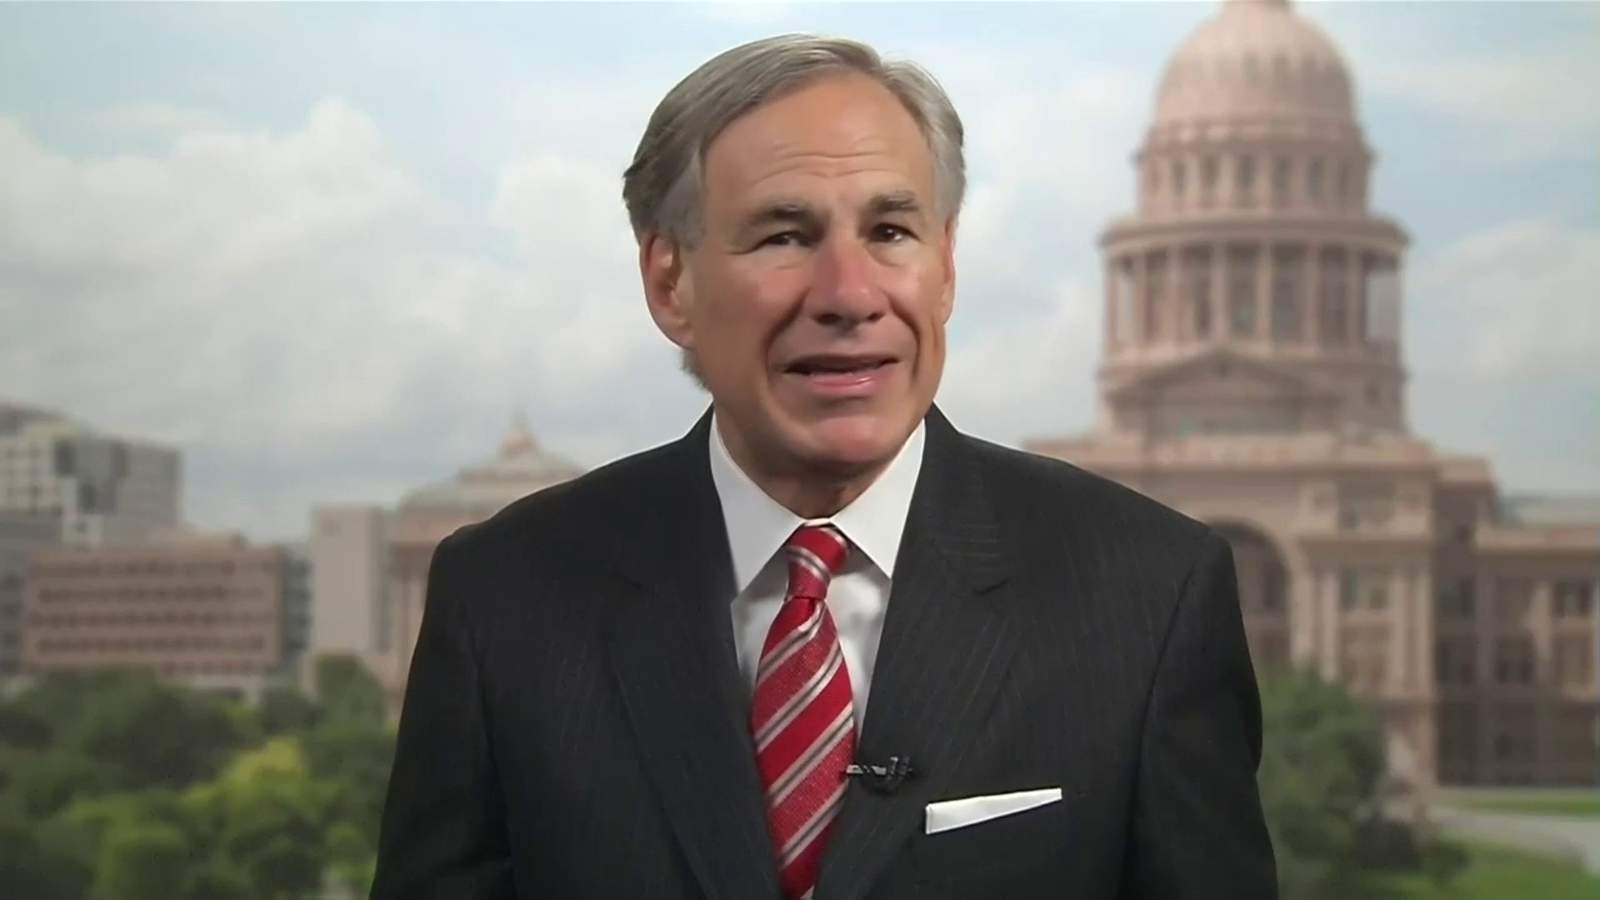 WATCH: KSAT interview with Governor Greg Abbott about plan to reopen Texas